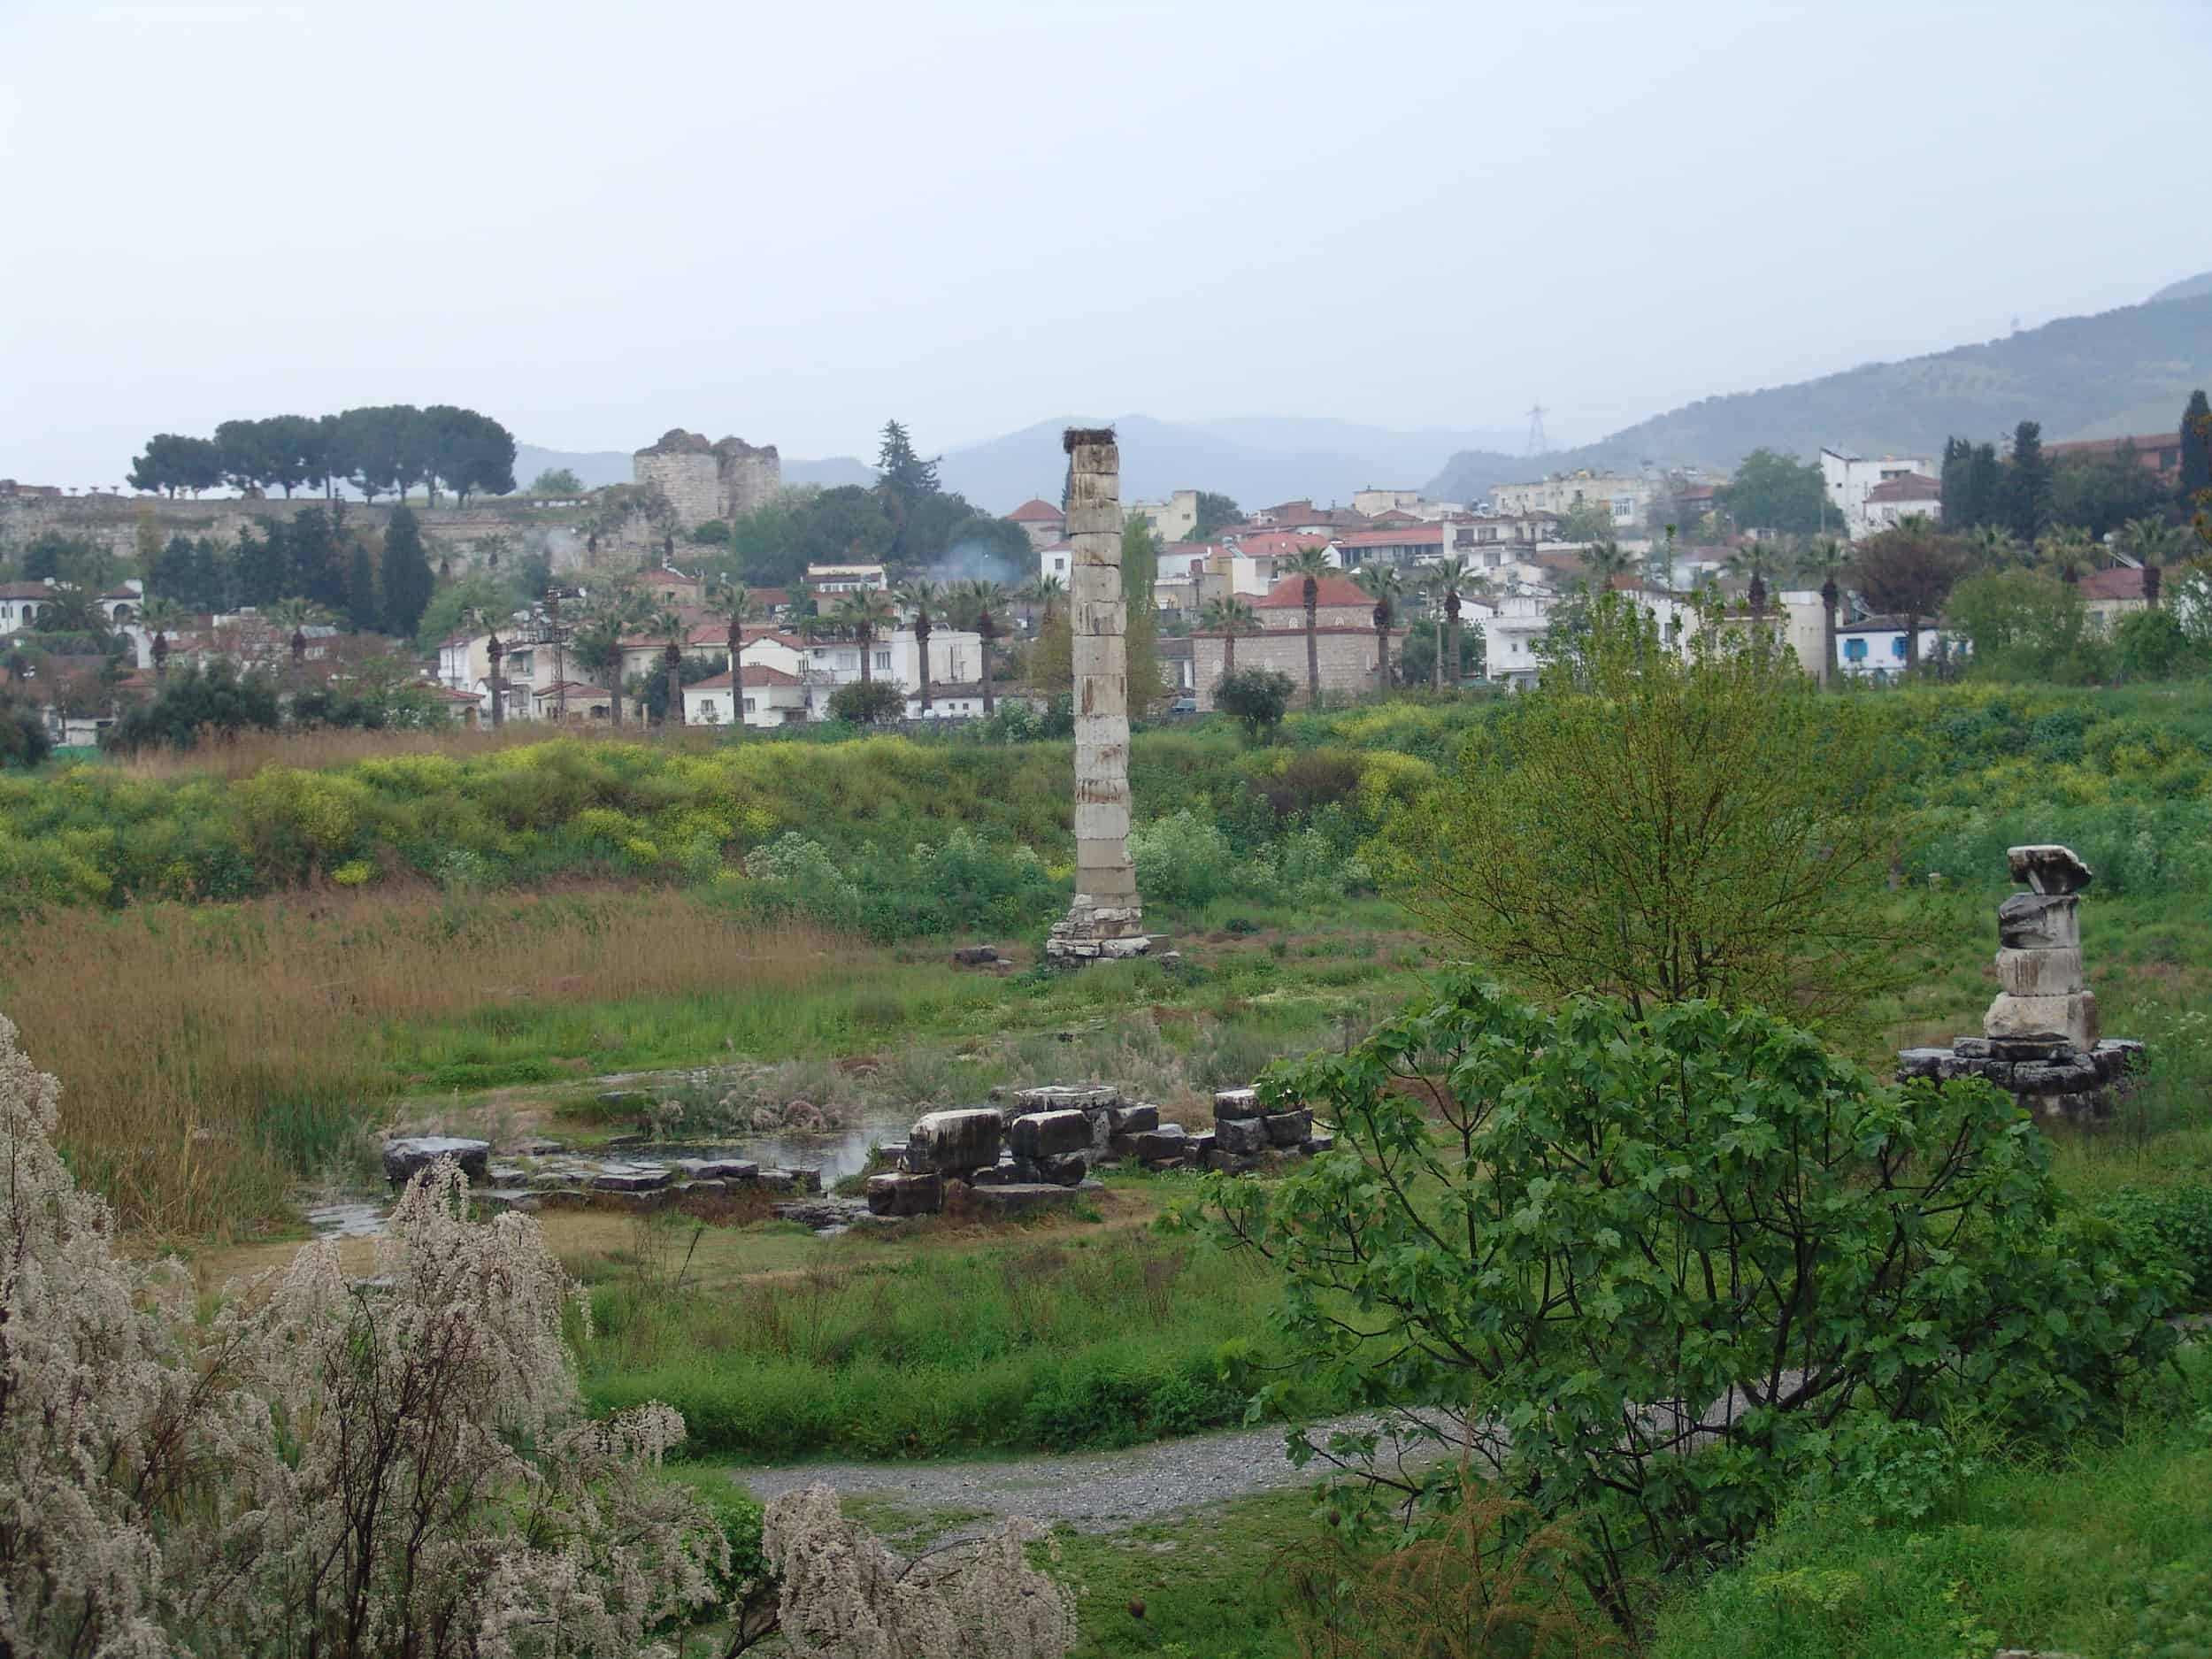 Site of the Temple of Artemis